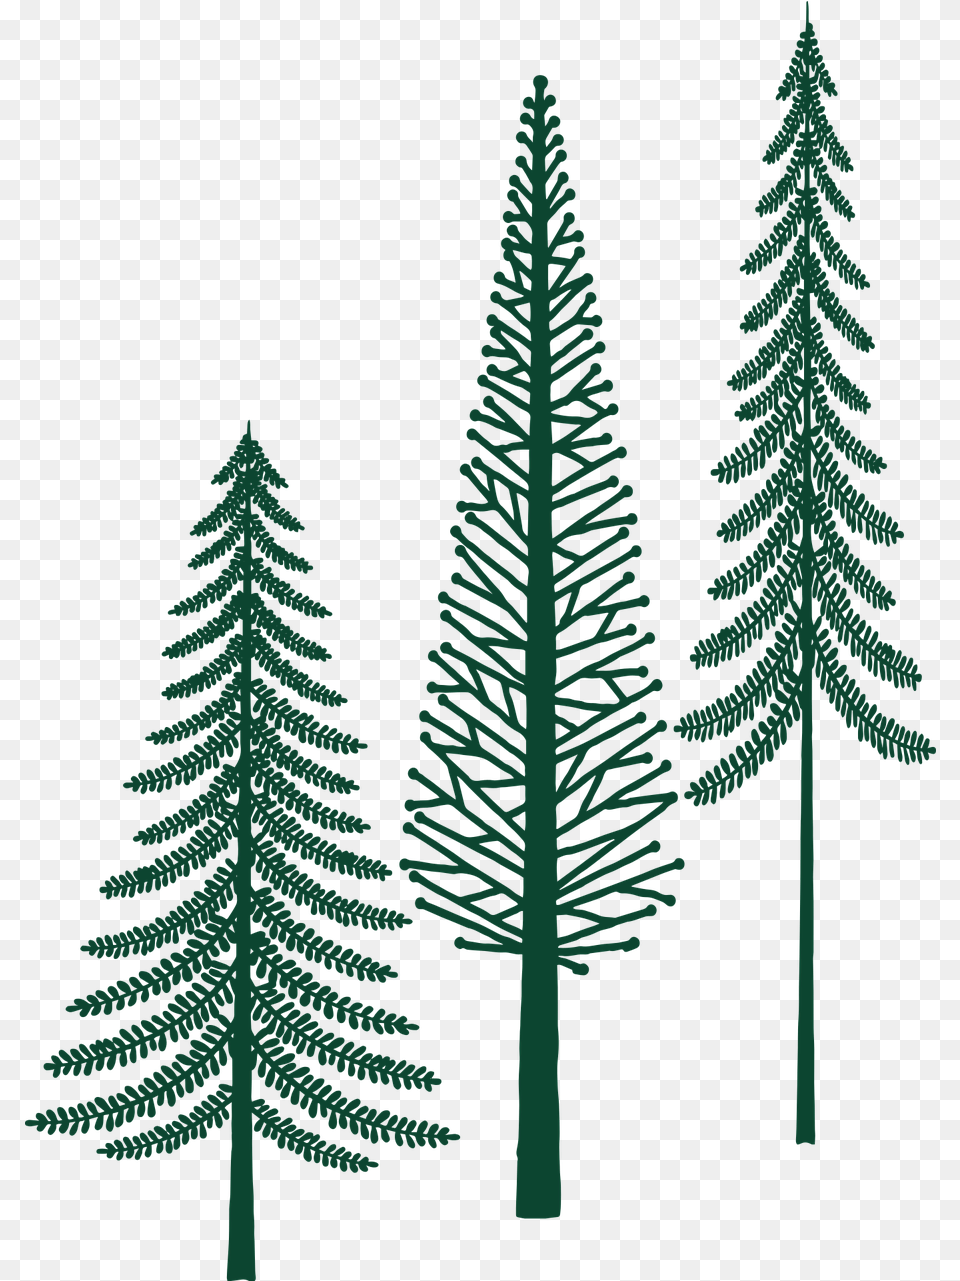 Evergreen Trees Forest Tree Vector Graphic On Pixabay White Pine, Fir, Plant, Christmas, Christmas Decorations Free Png Download